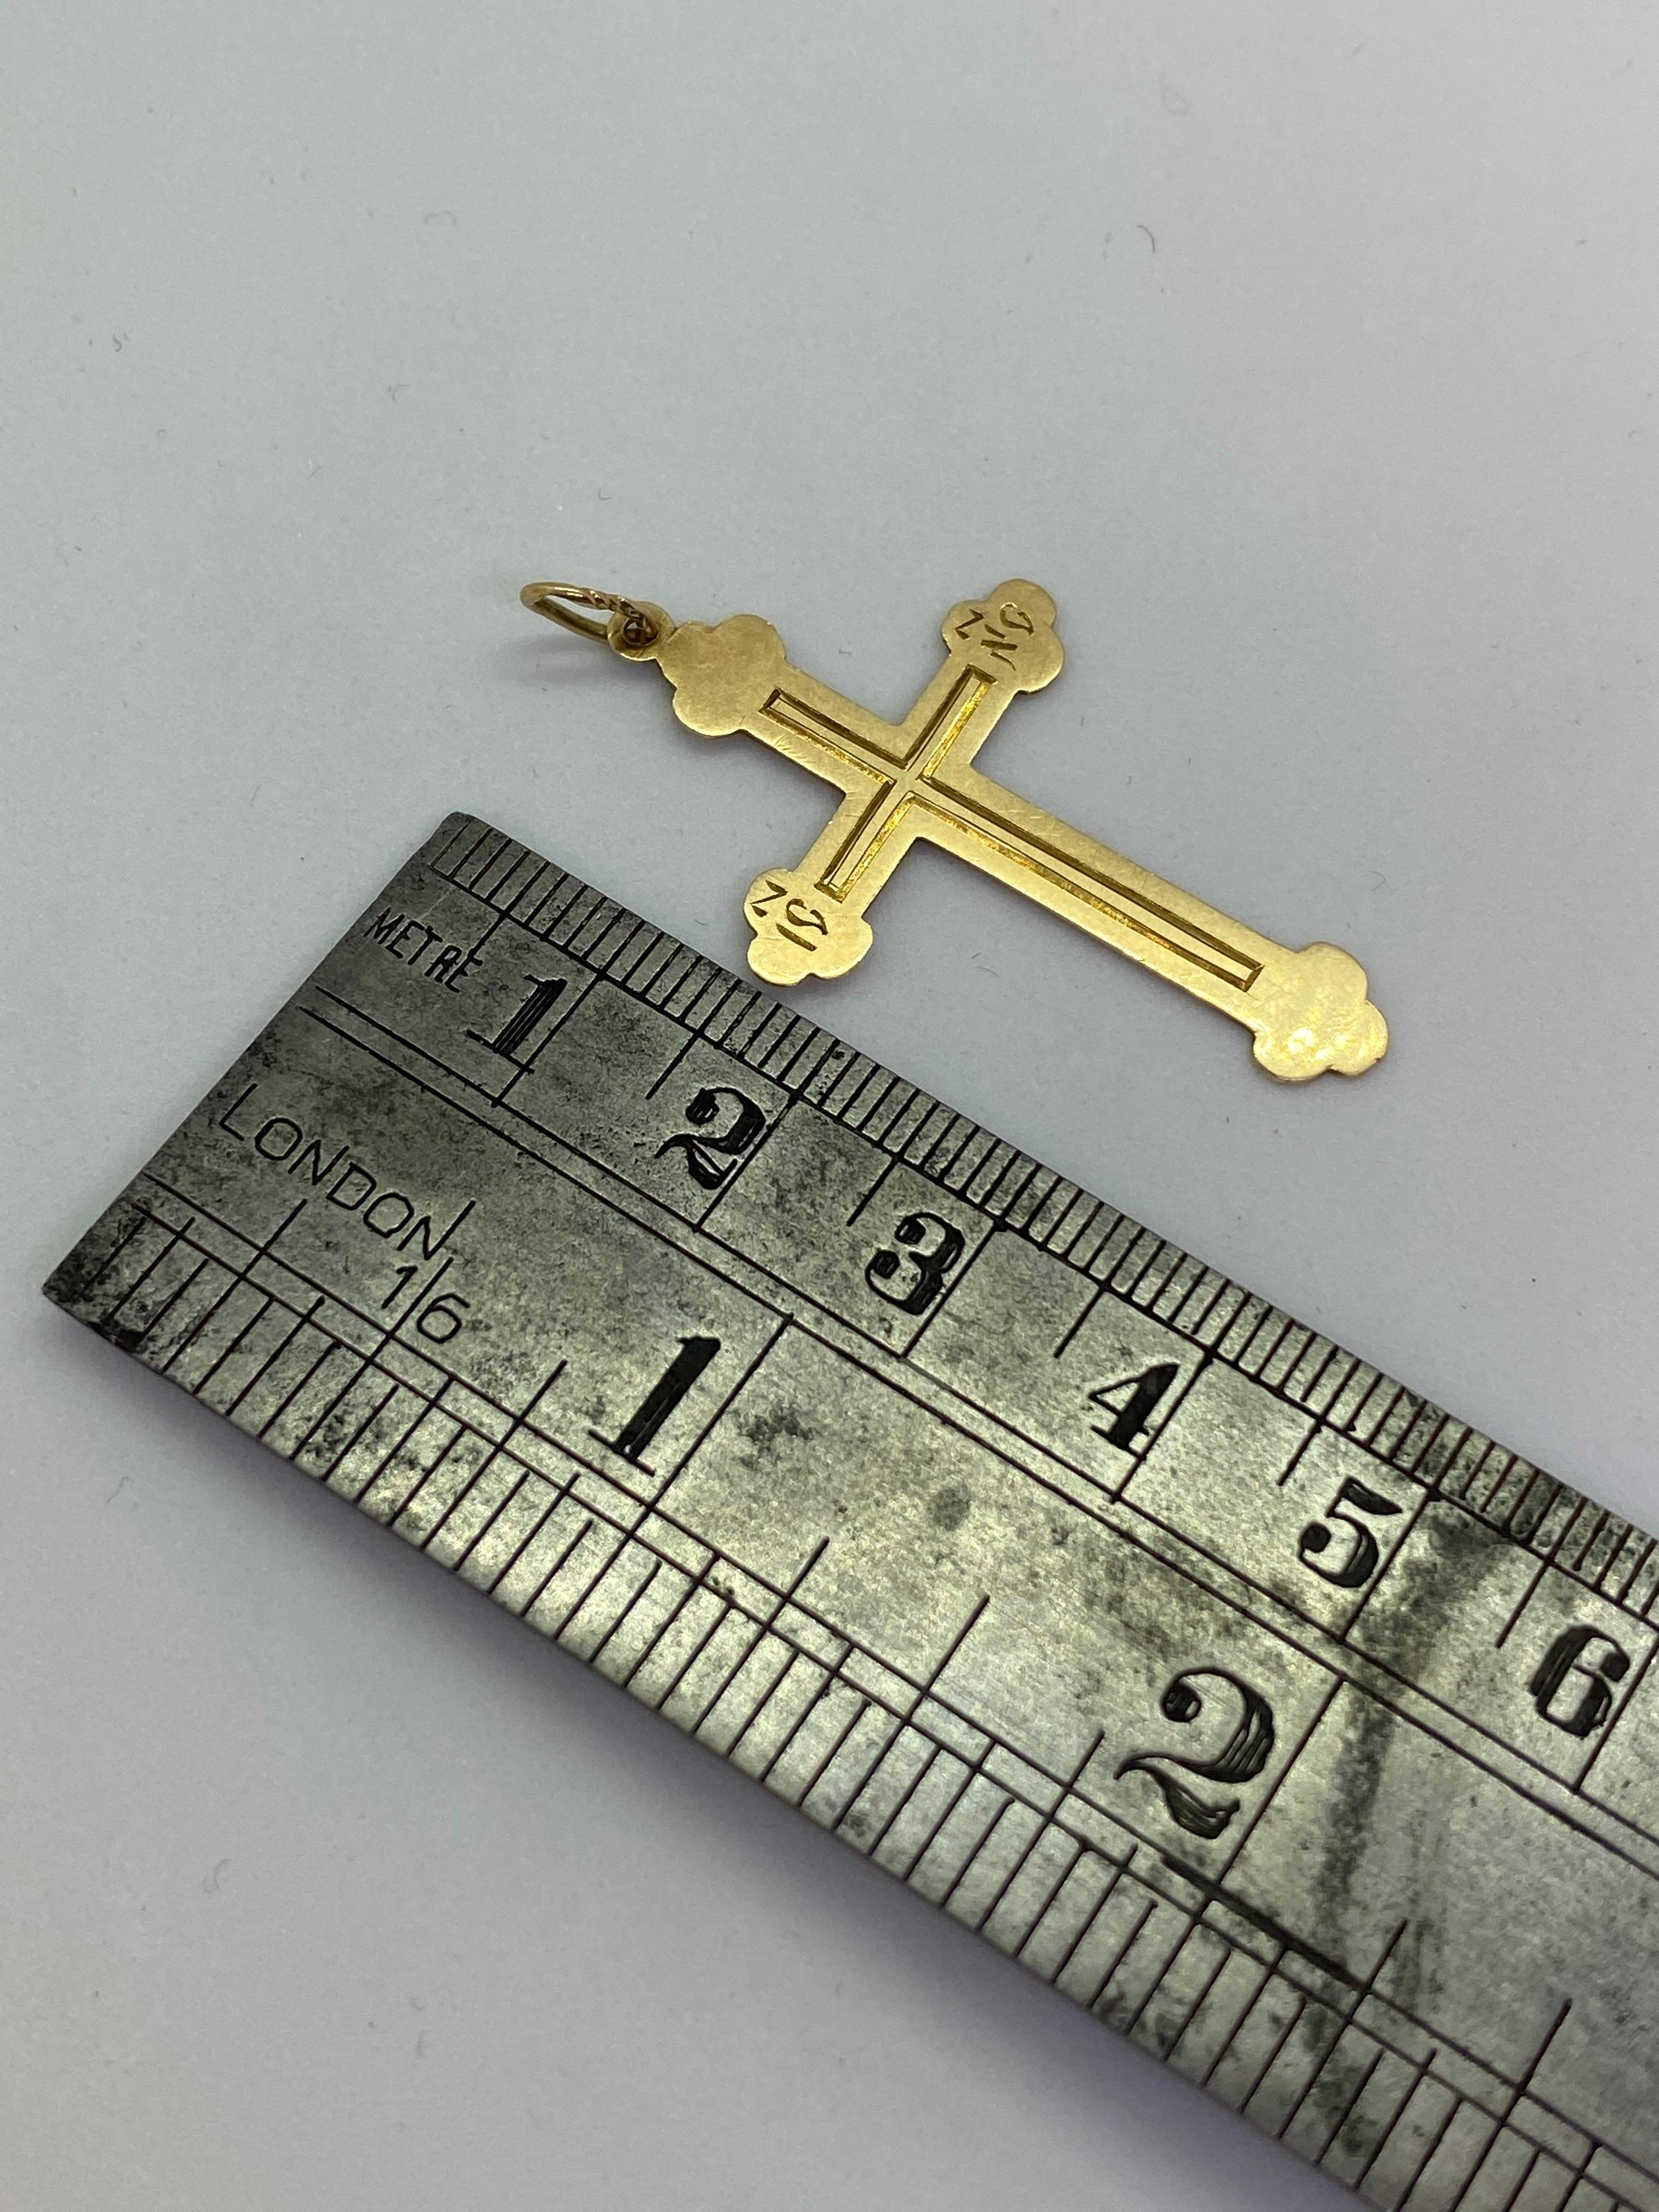 14 Carat Yellow Gold Cross Russia and Estonia Pendant necklaces
Russian gold stamp 56
Two pendants
1867 - Bigger one sizes Width 2.7cm, Length 4.4cm,  Depth 0,1cm
Smaller one sizes Width 2.3cm, Length 3.9cm, 0.05cm